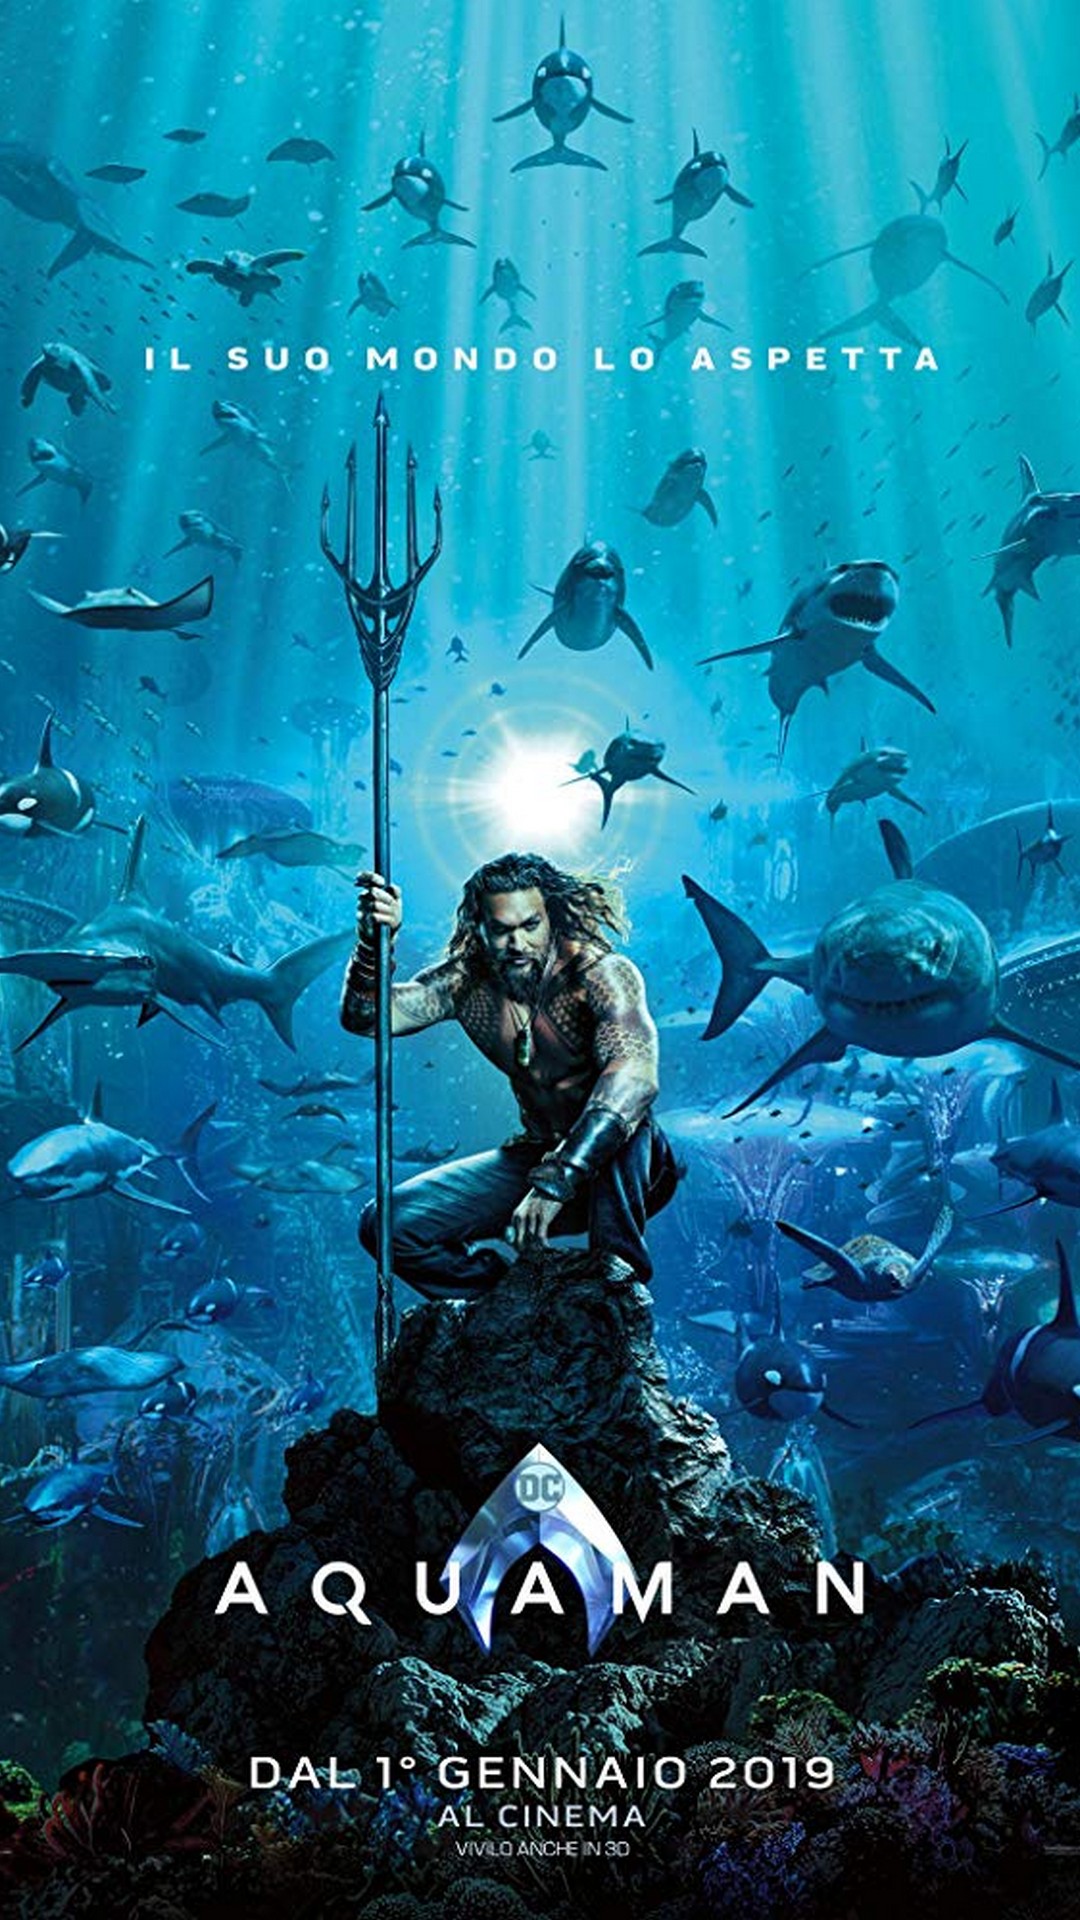 Aquaman iPhone Wallpaper HD with image resolution 1080x1920 pixel. You can make this wallpaper for your Desktop Computer Backgrounds, Mac Wallpapers, Android Lock screen or iPhone Screensavers